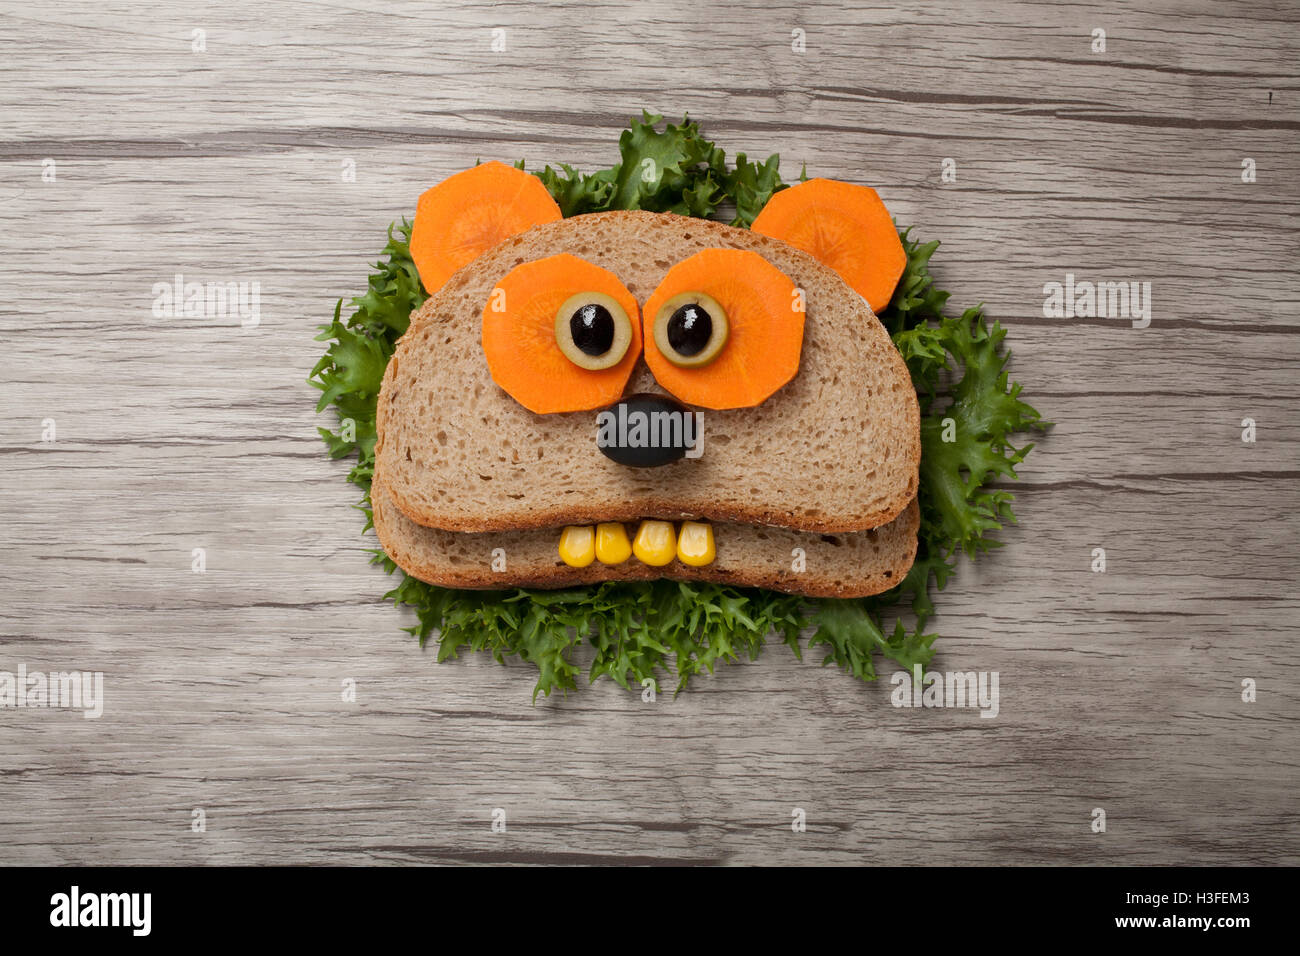 Surprised panda made of bread on board Stock Photo